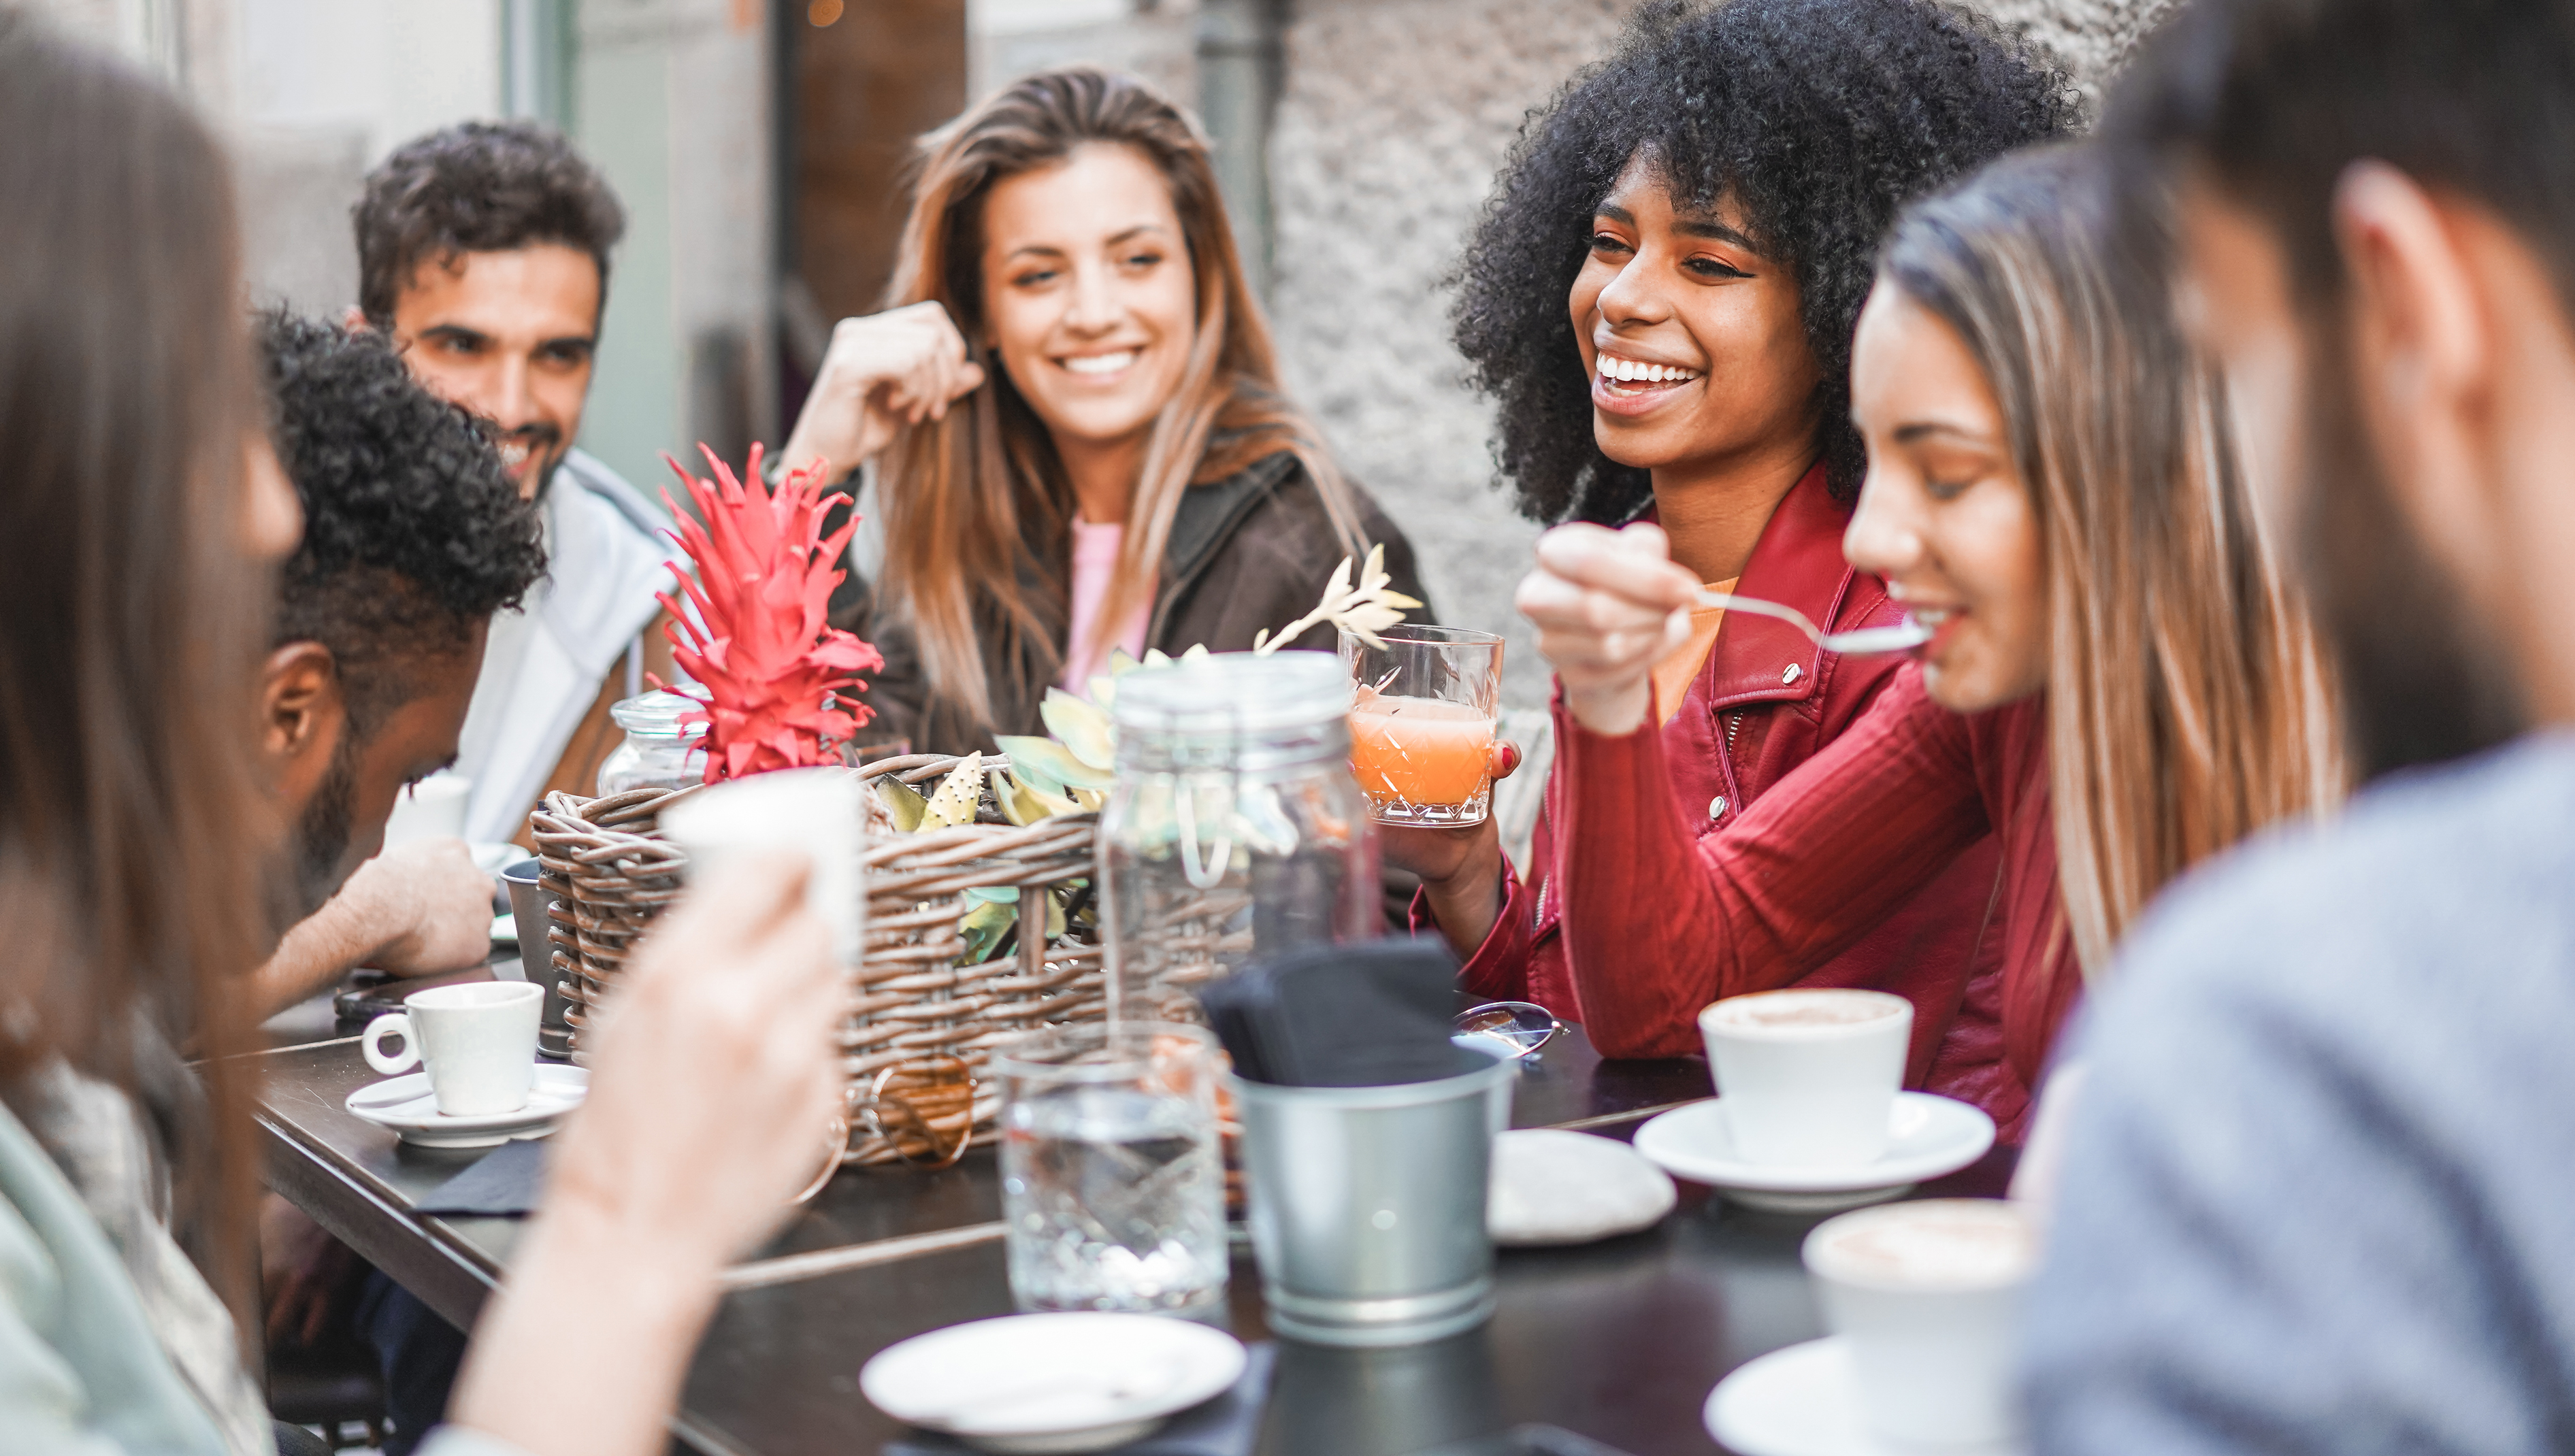 group of young adults enjoying meal together at outdoor table